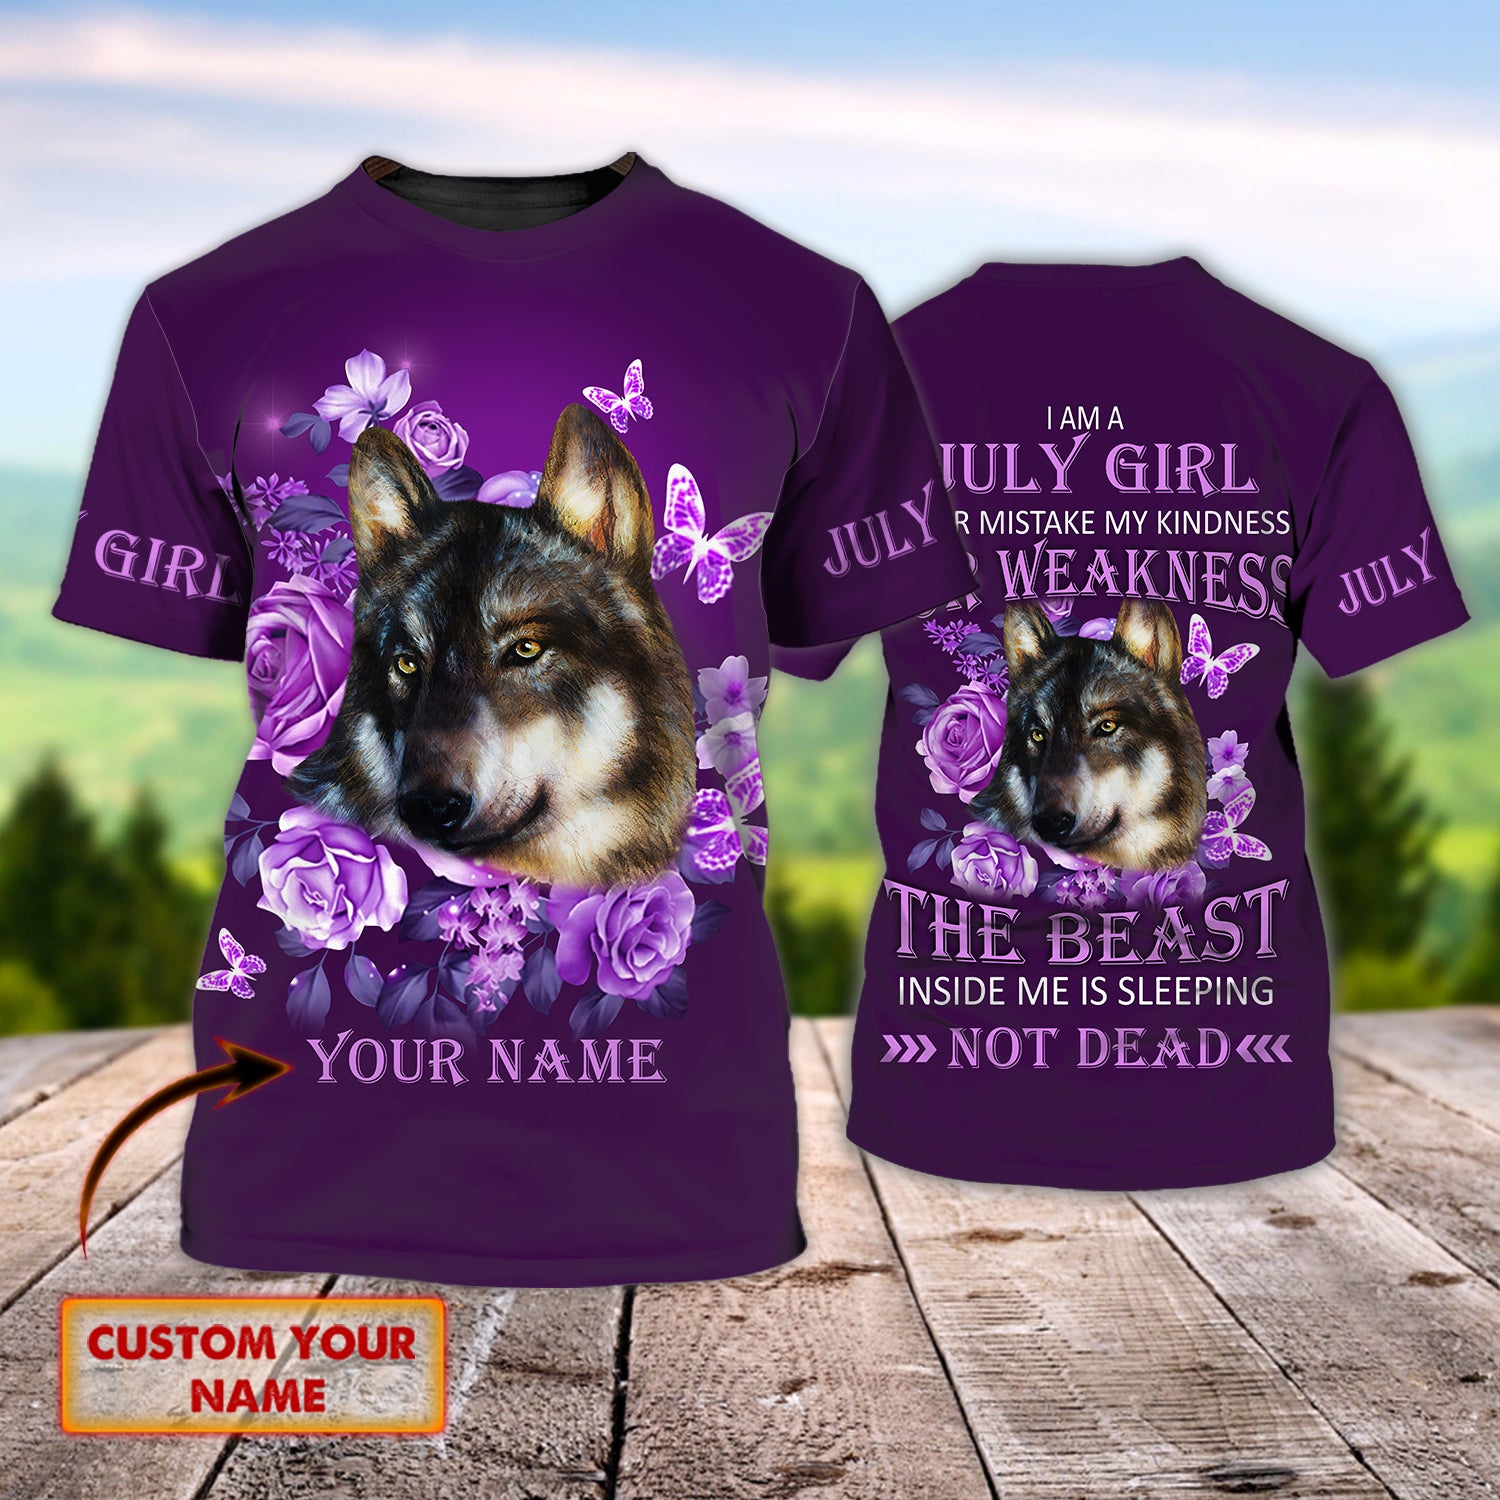 July Girl 160606 - Personalized Name 3D Tshirt - 16hb